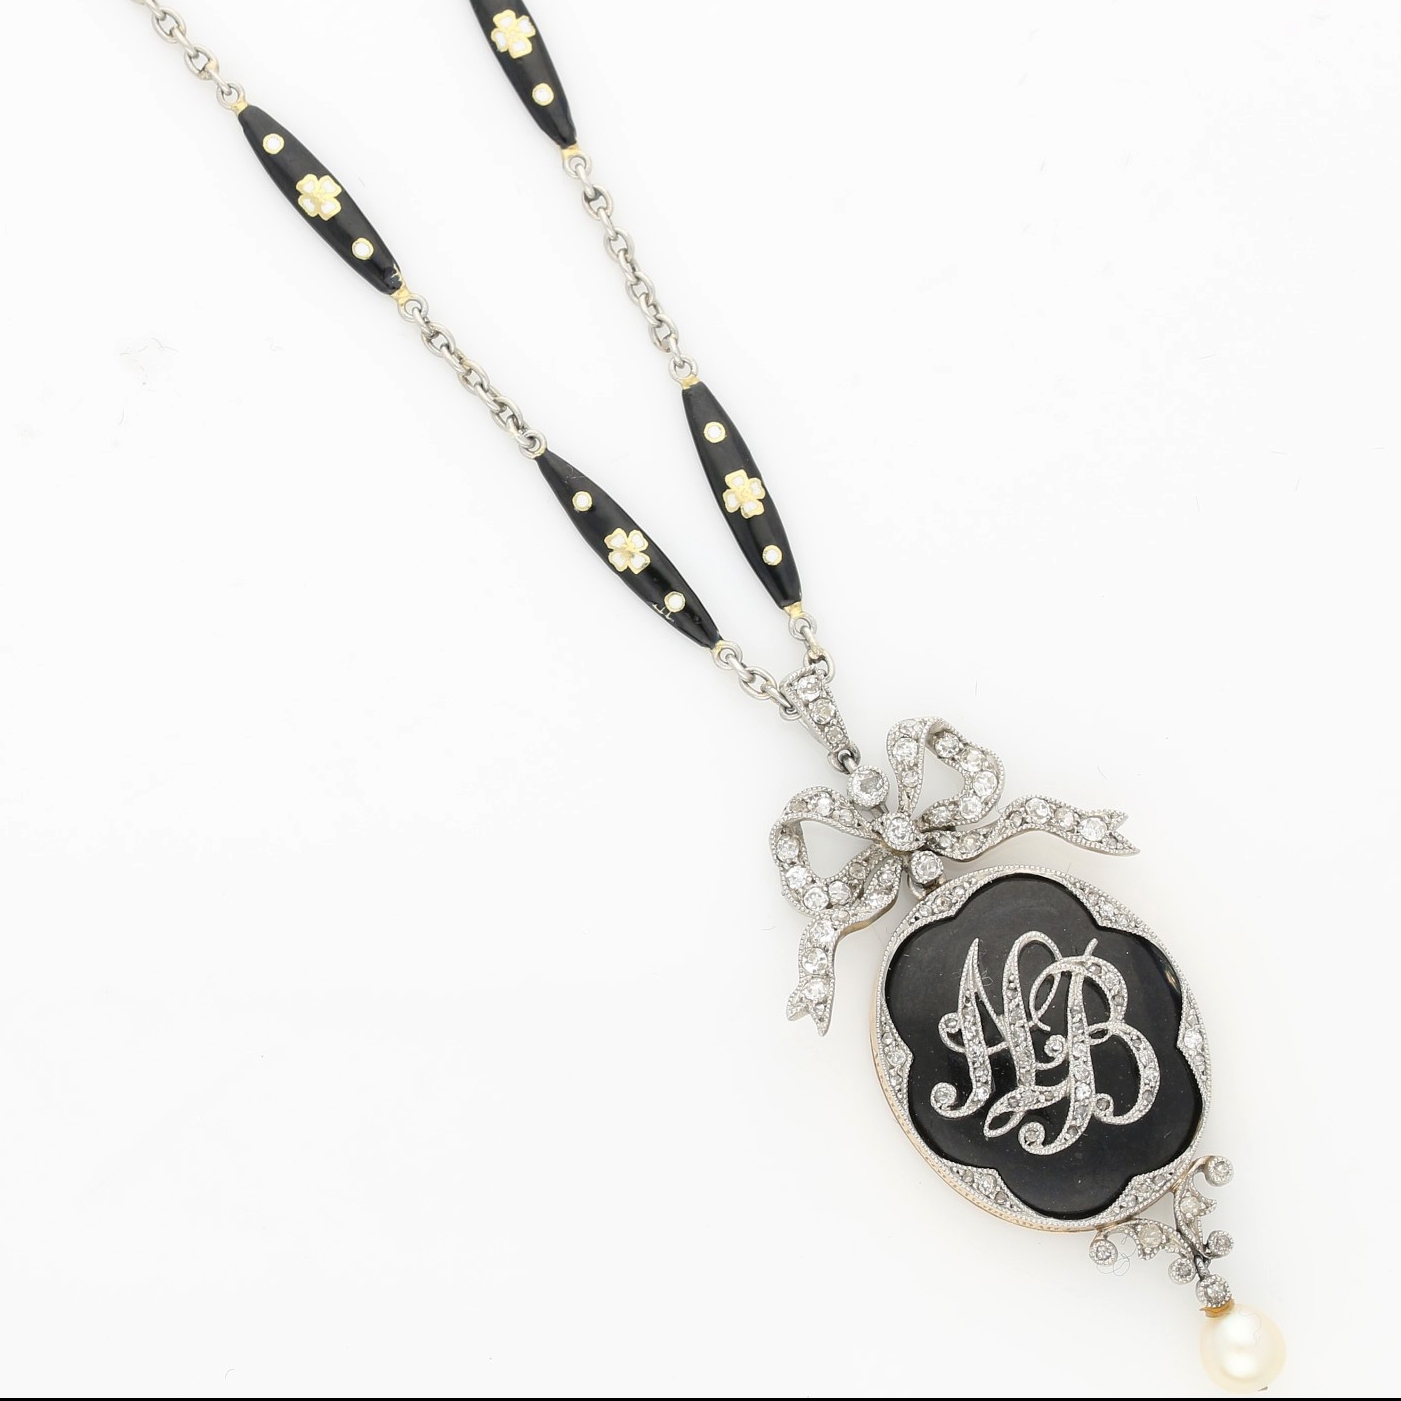 The Victorian mourning pendant with Amy Burton's exact initials